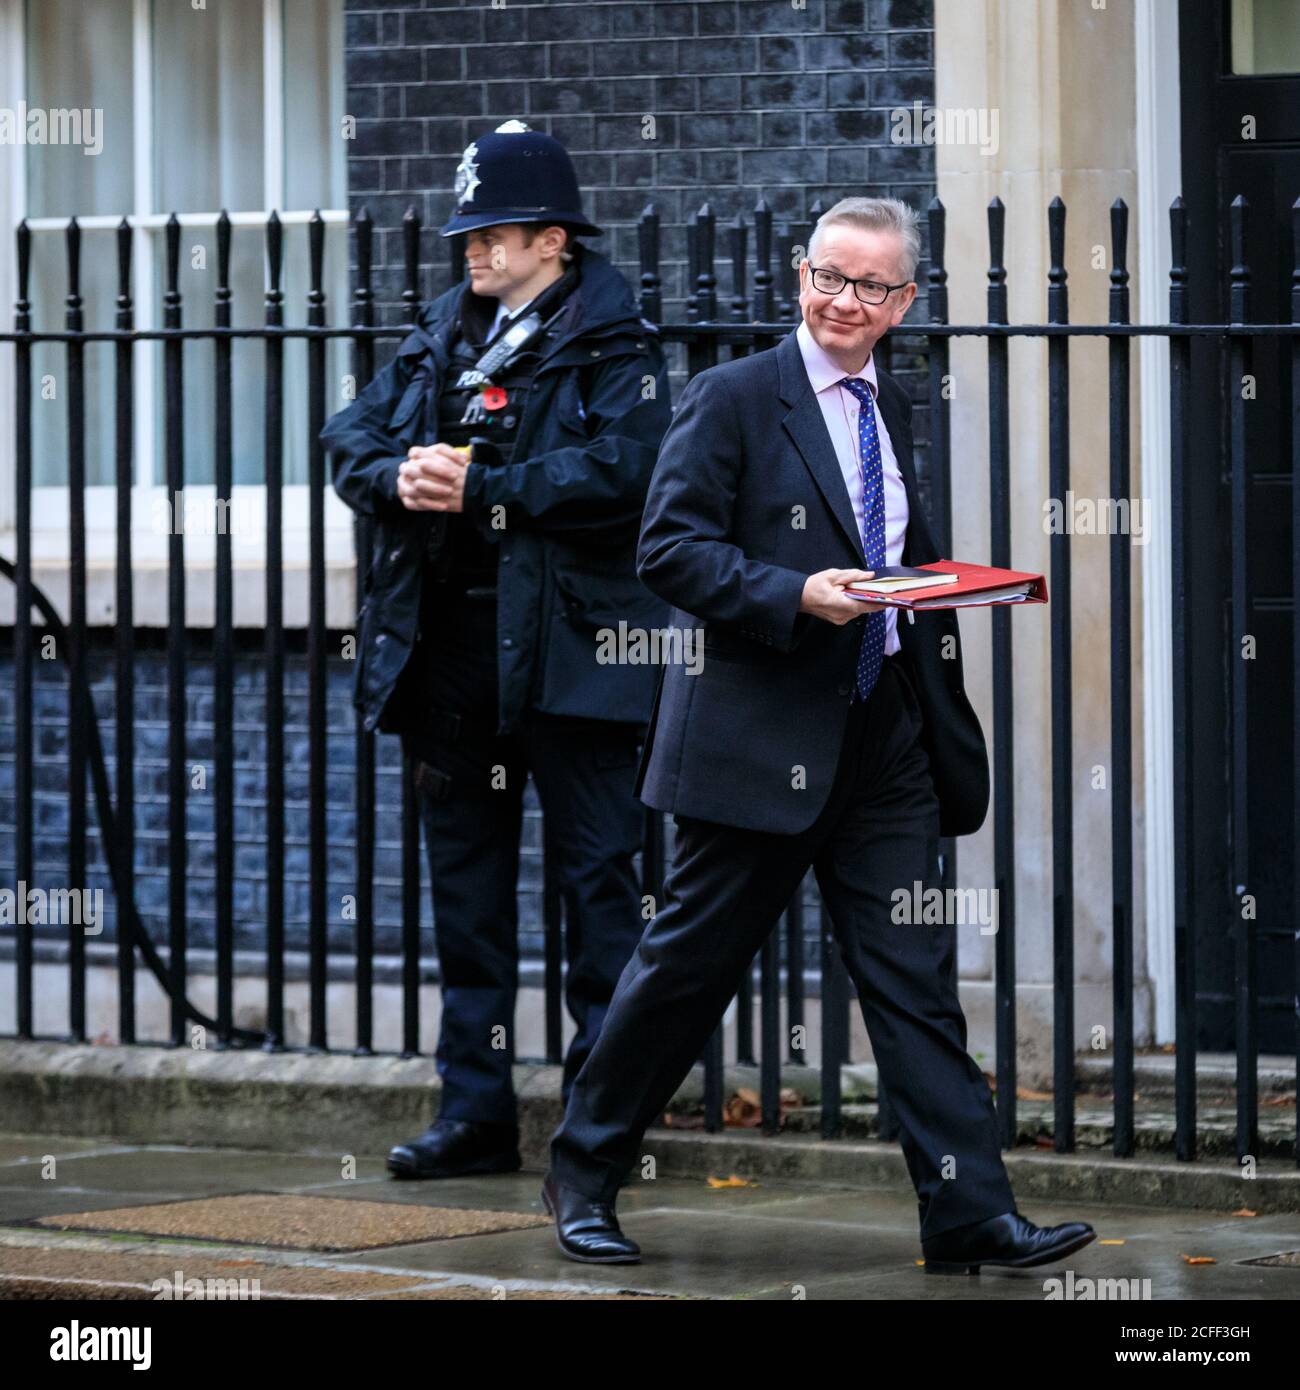 Michael Gove, MP British Conservative Party politician and Cabinet Minister in May and Johnson government, Downing Street, London, UK Stock Photo